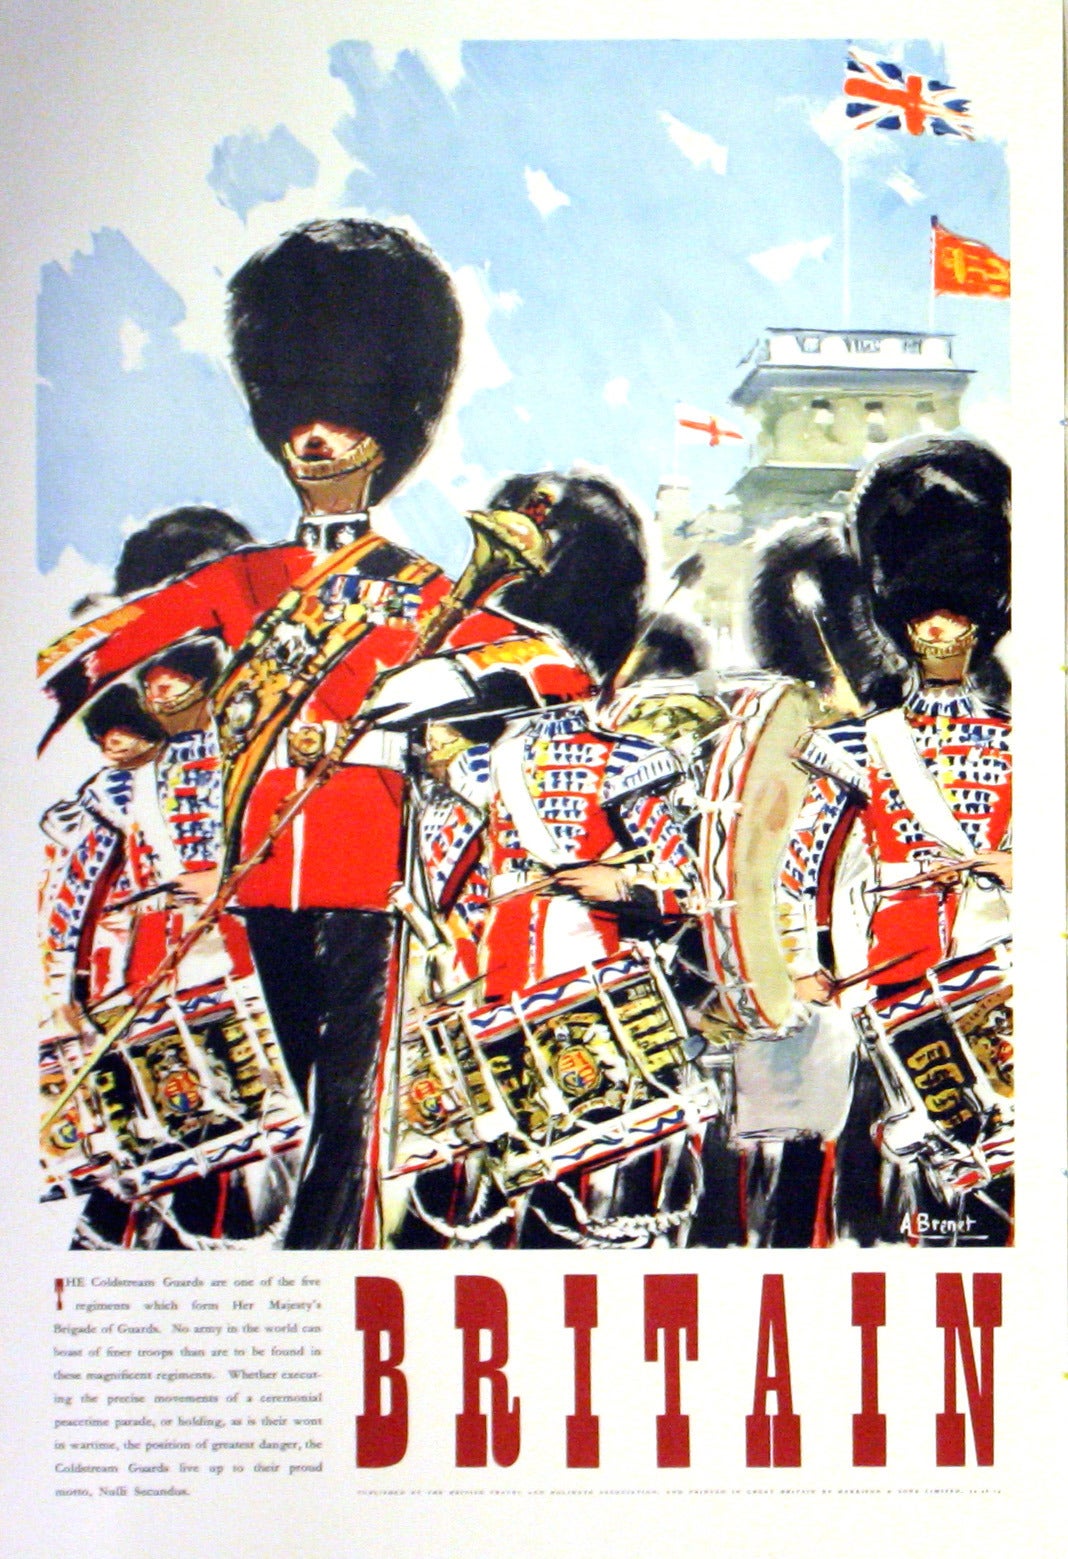 Original Vintage Travel Advertising Poster for Britain, the Coldstream Guards